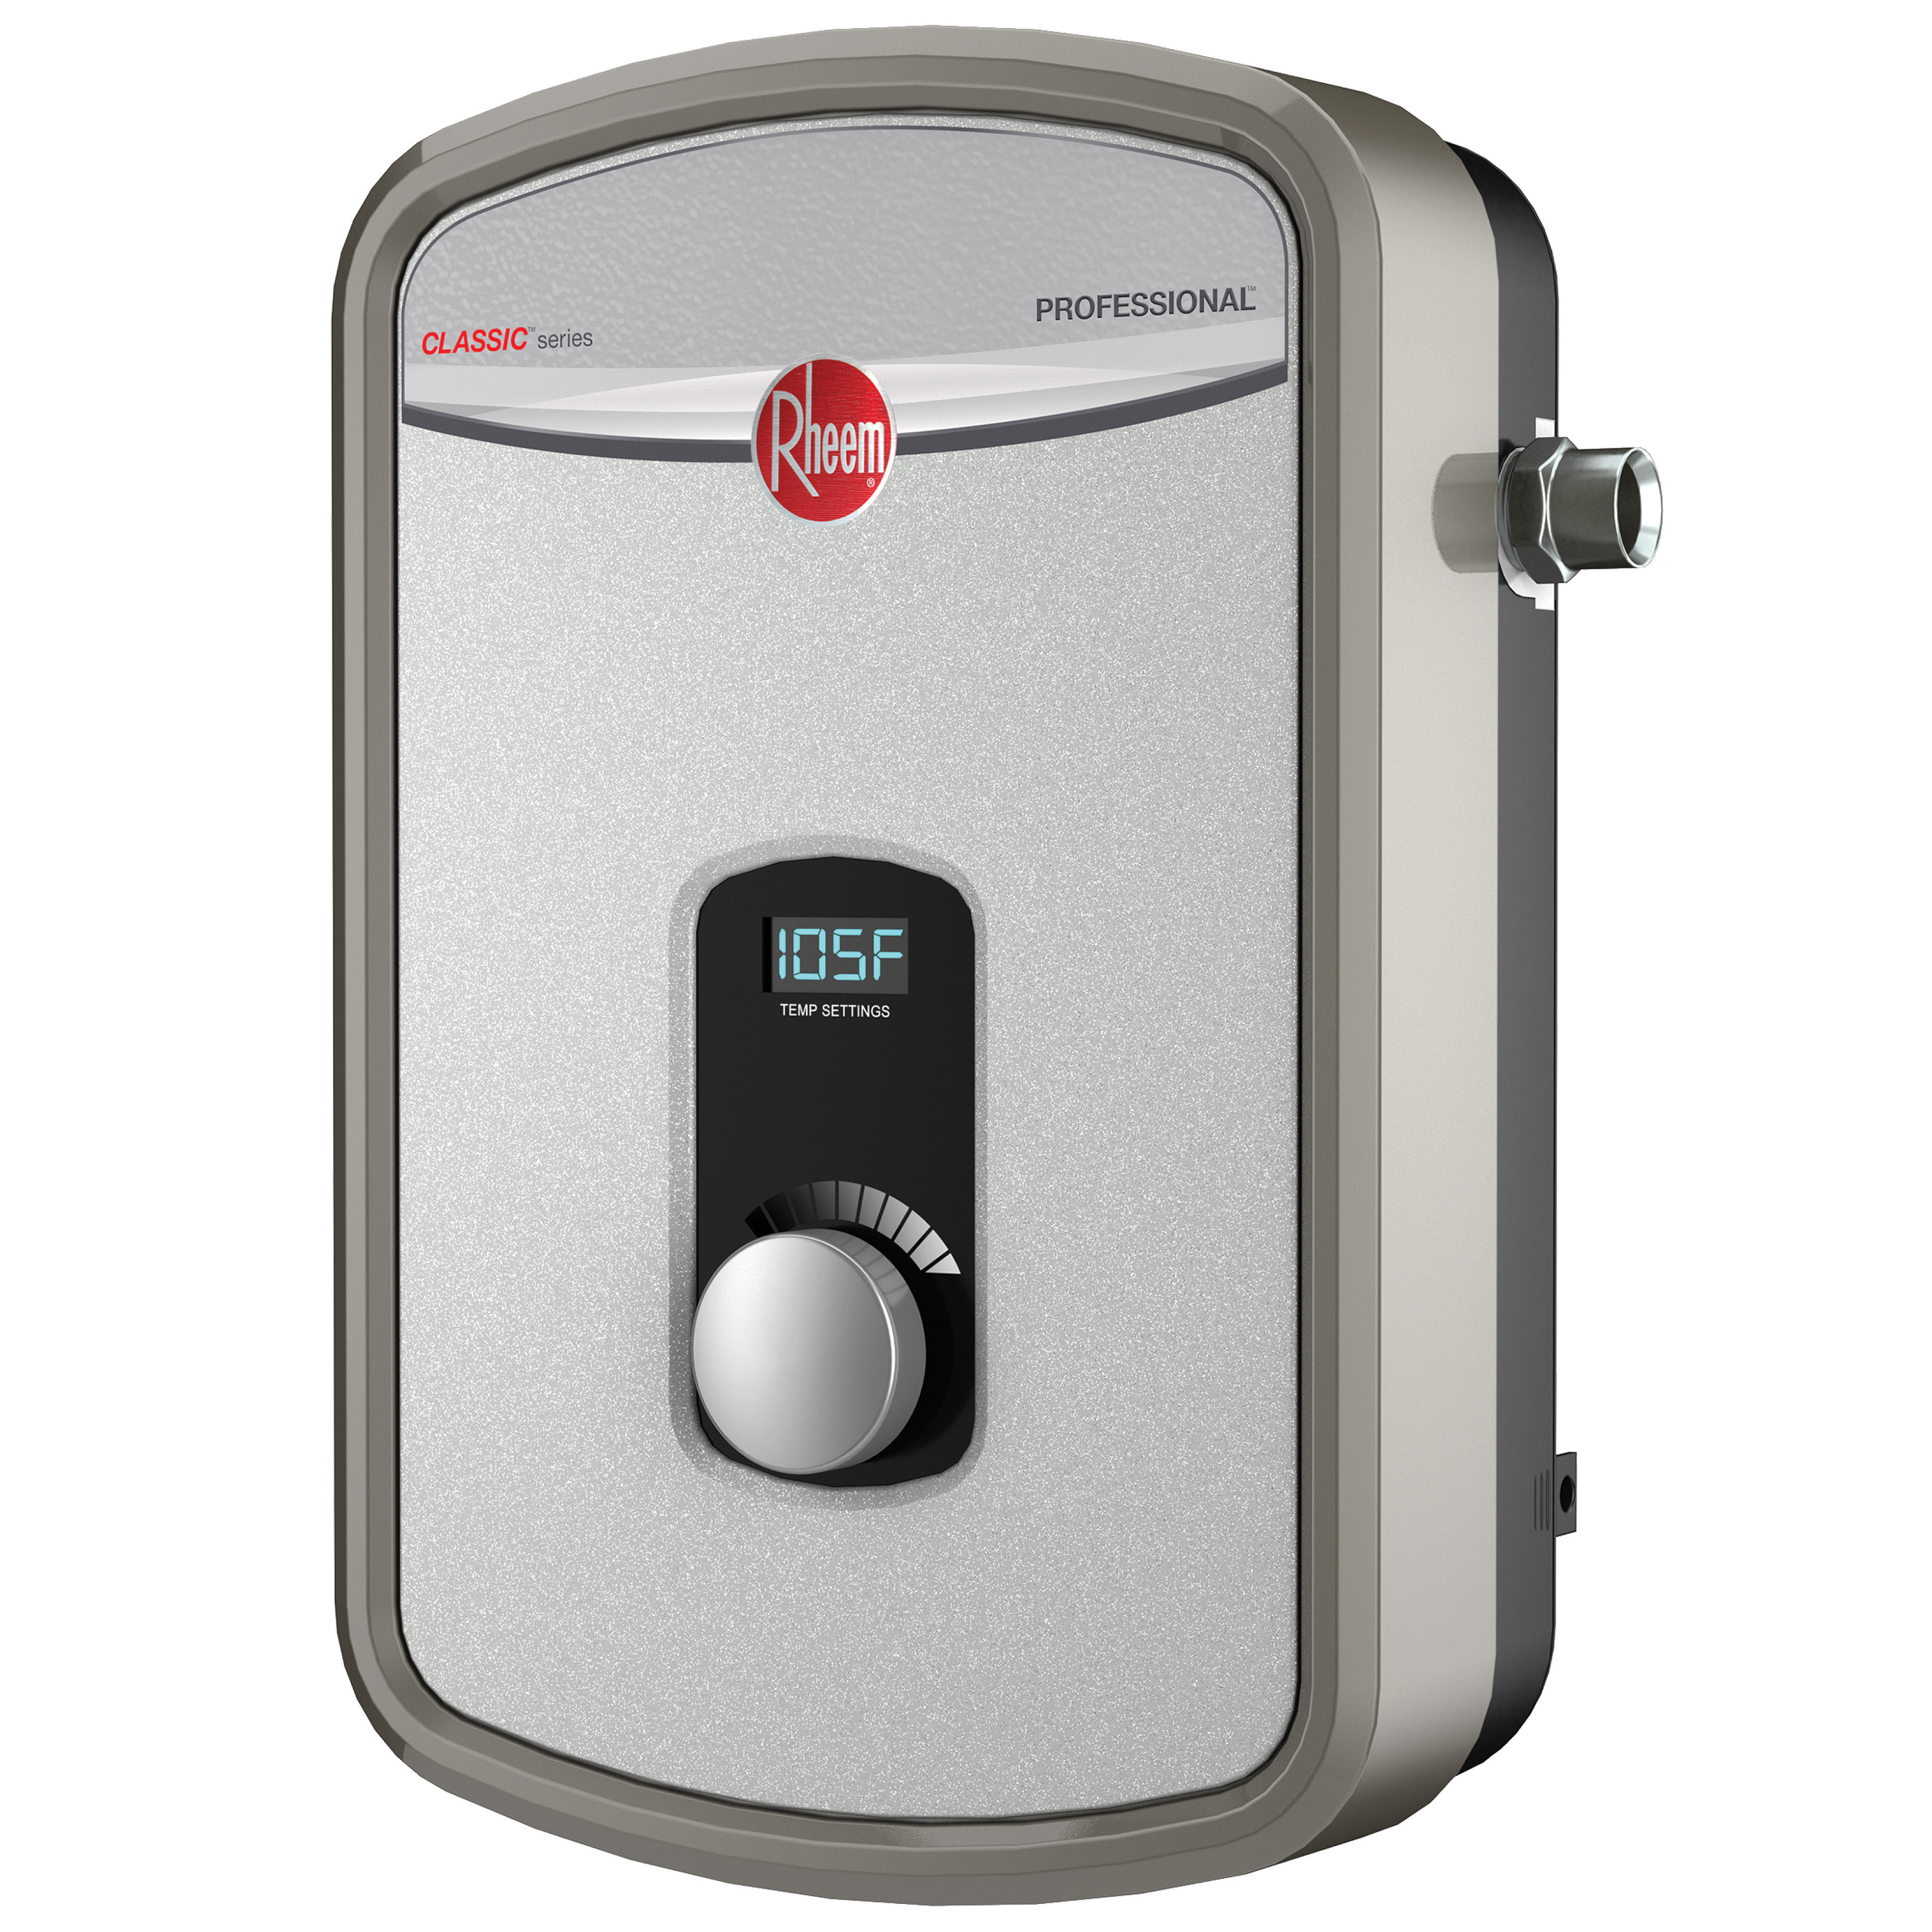 Rheem Water Heater 120V Residential Tankless Compact Digital Temperature Control 